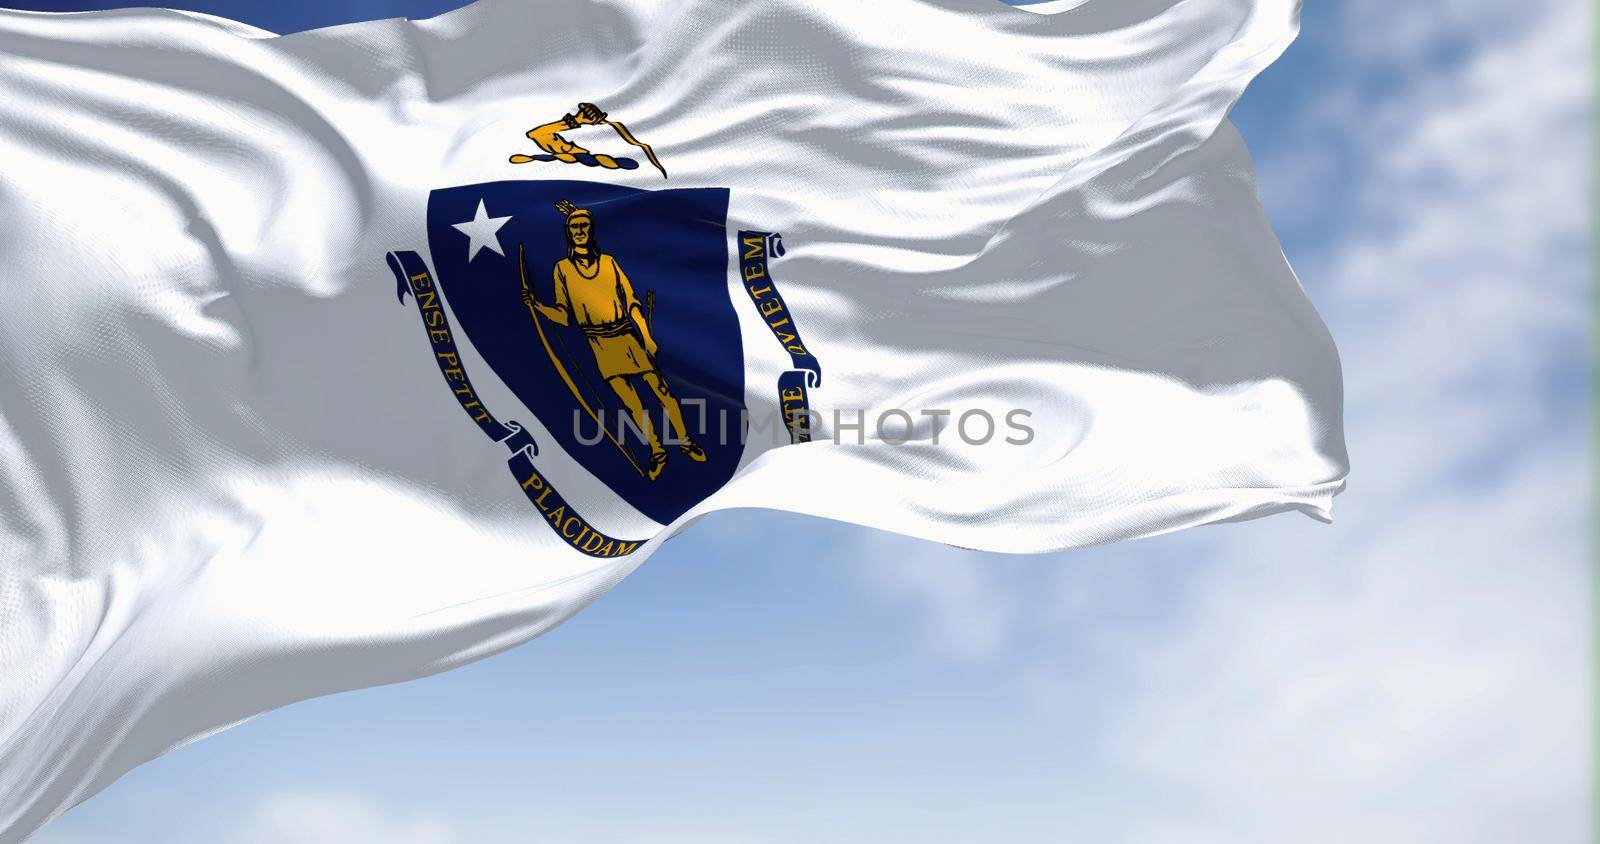 The US state flag of Massachusetts waving in the wind. Massachusetts is the most populous state in the New England region of the United States. Fabric texture background.